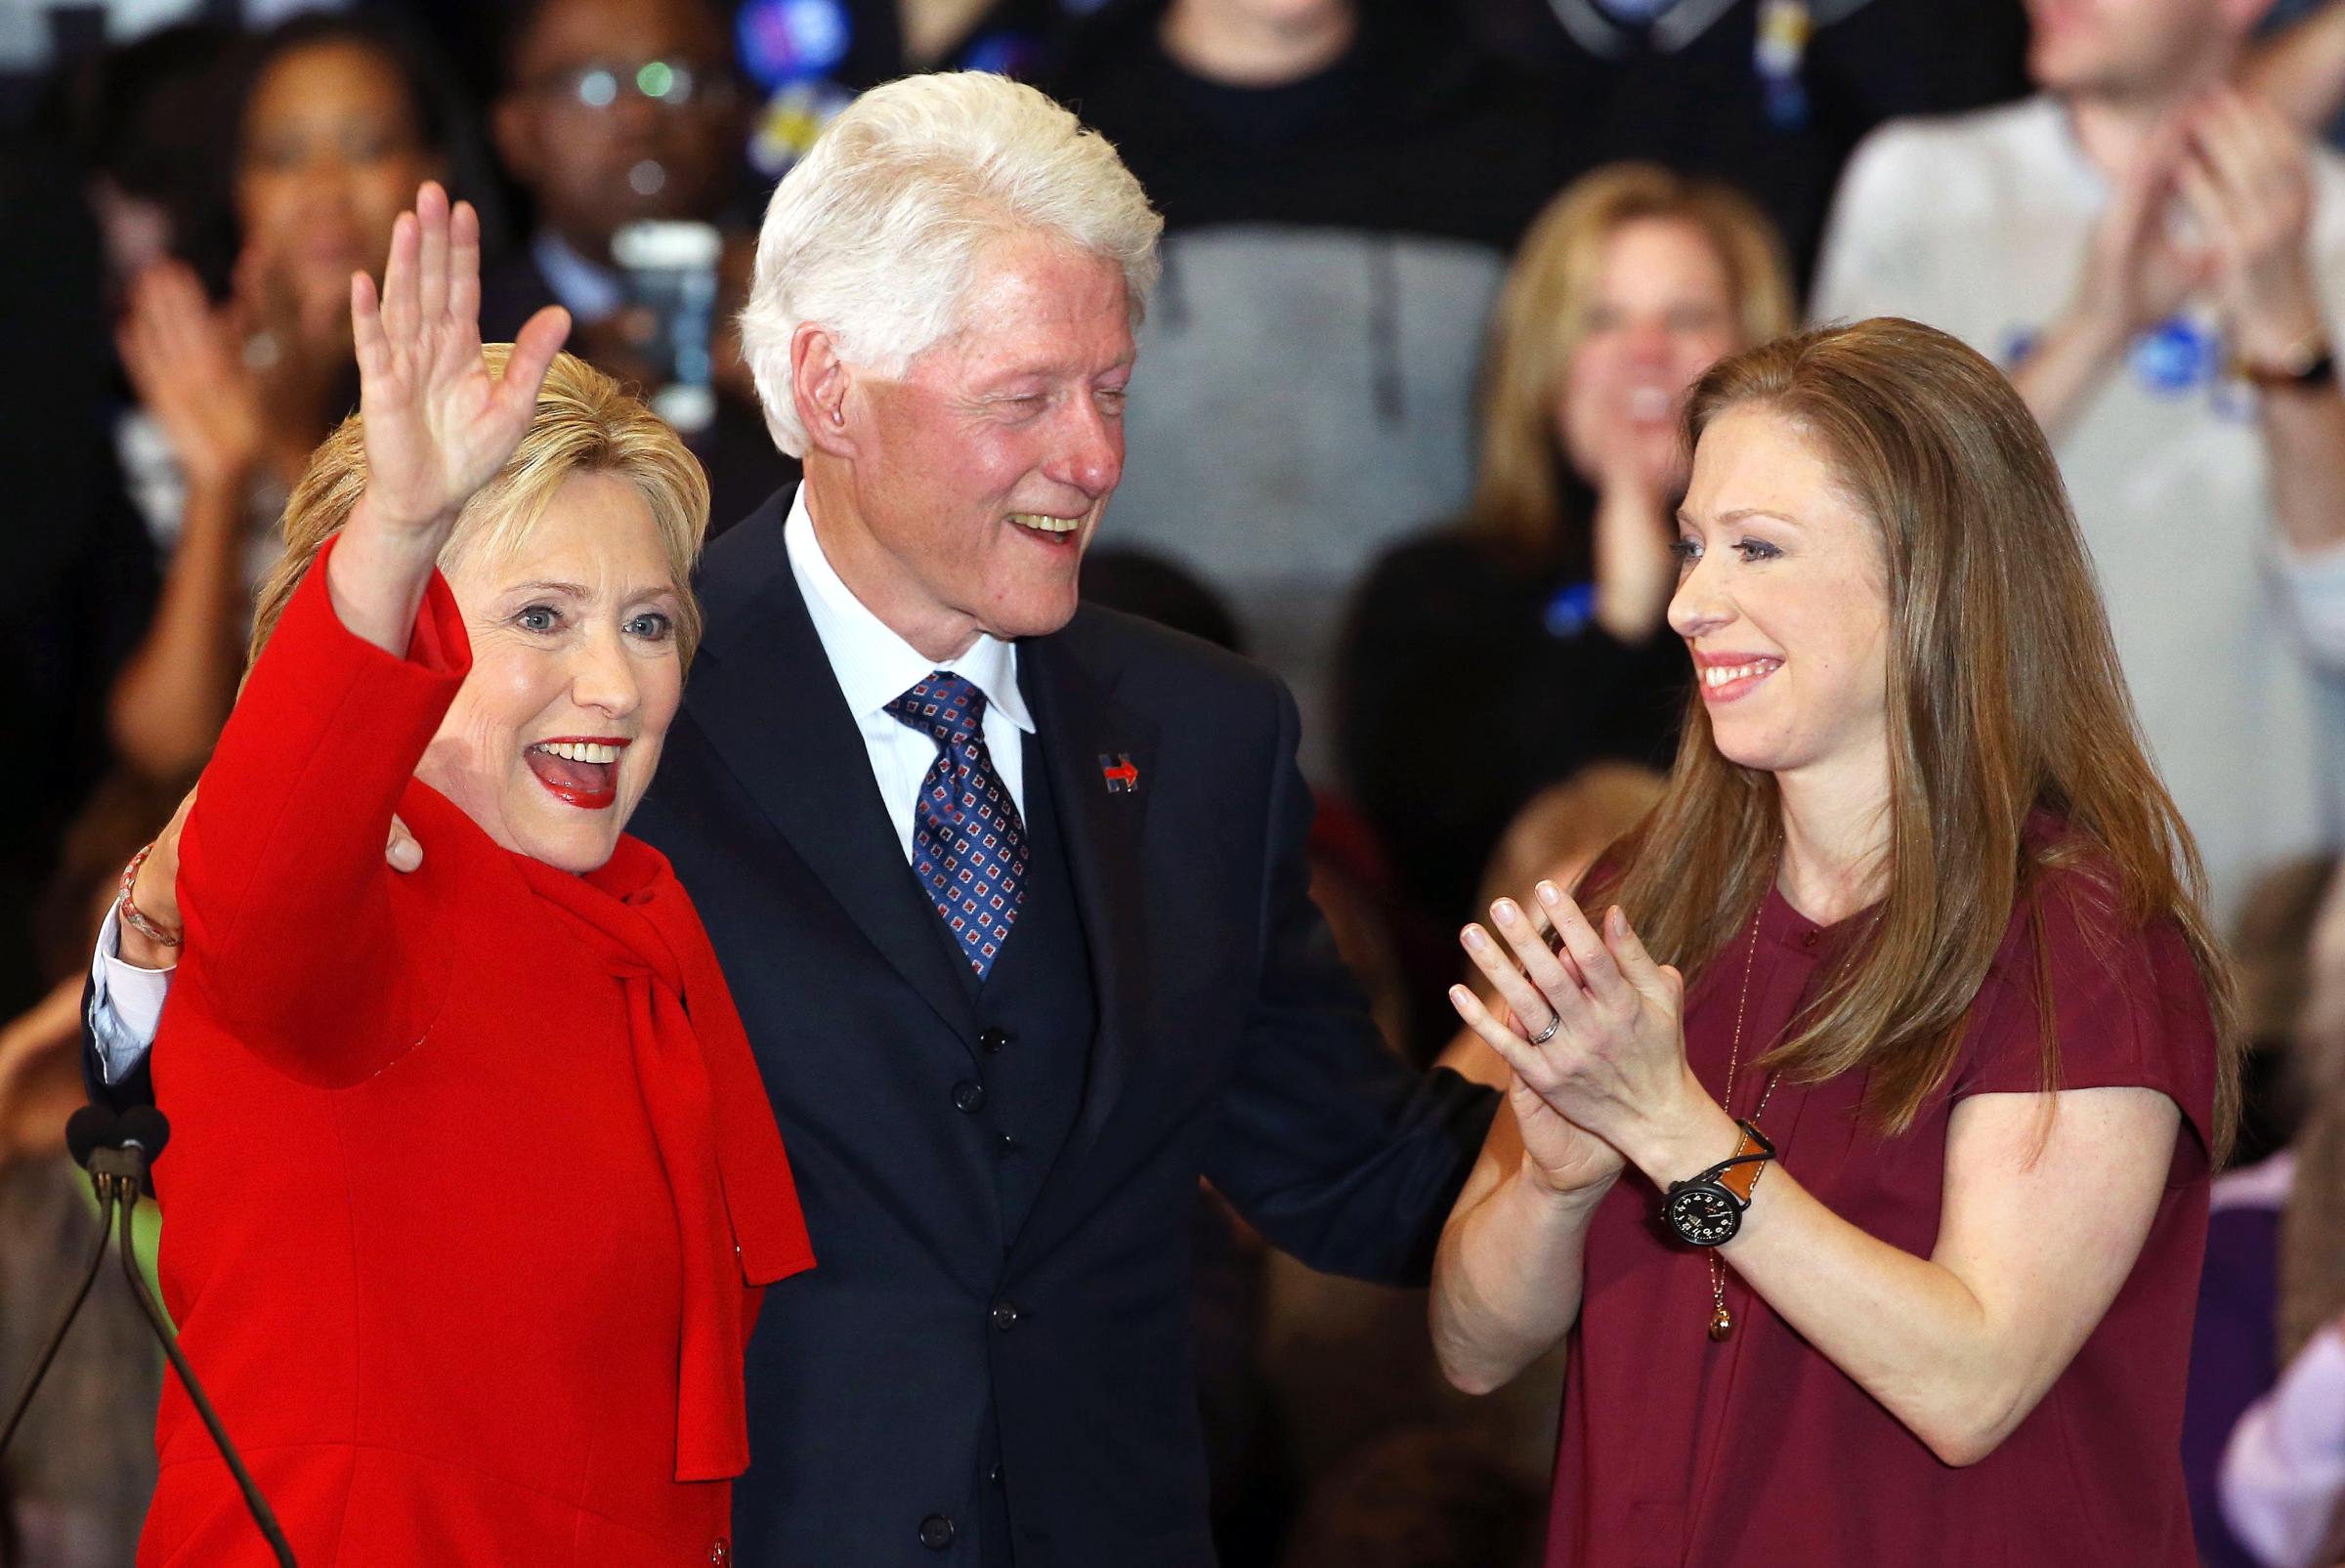 Democratic presidential candidate, former Secretary of State Hillary Clinton waves to supporters as husband and former President Bill Clinton and daughter Chelsea Clinton cheer at her caucus night event on Feb. 1, 2016 in Des Moines, Iowa.